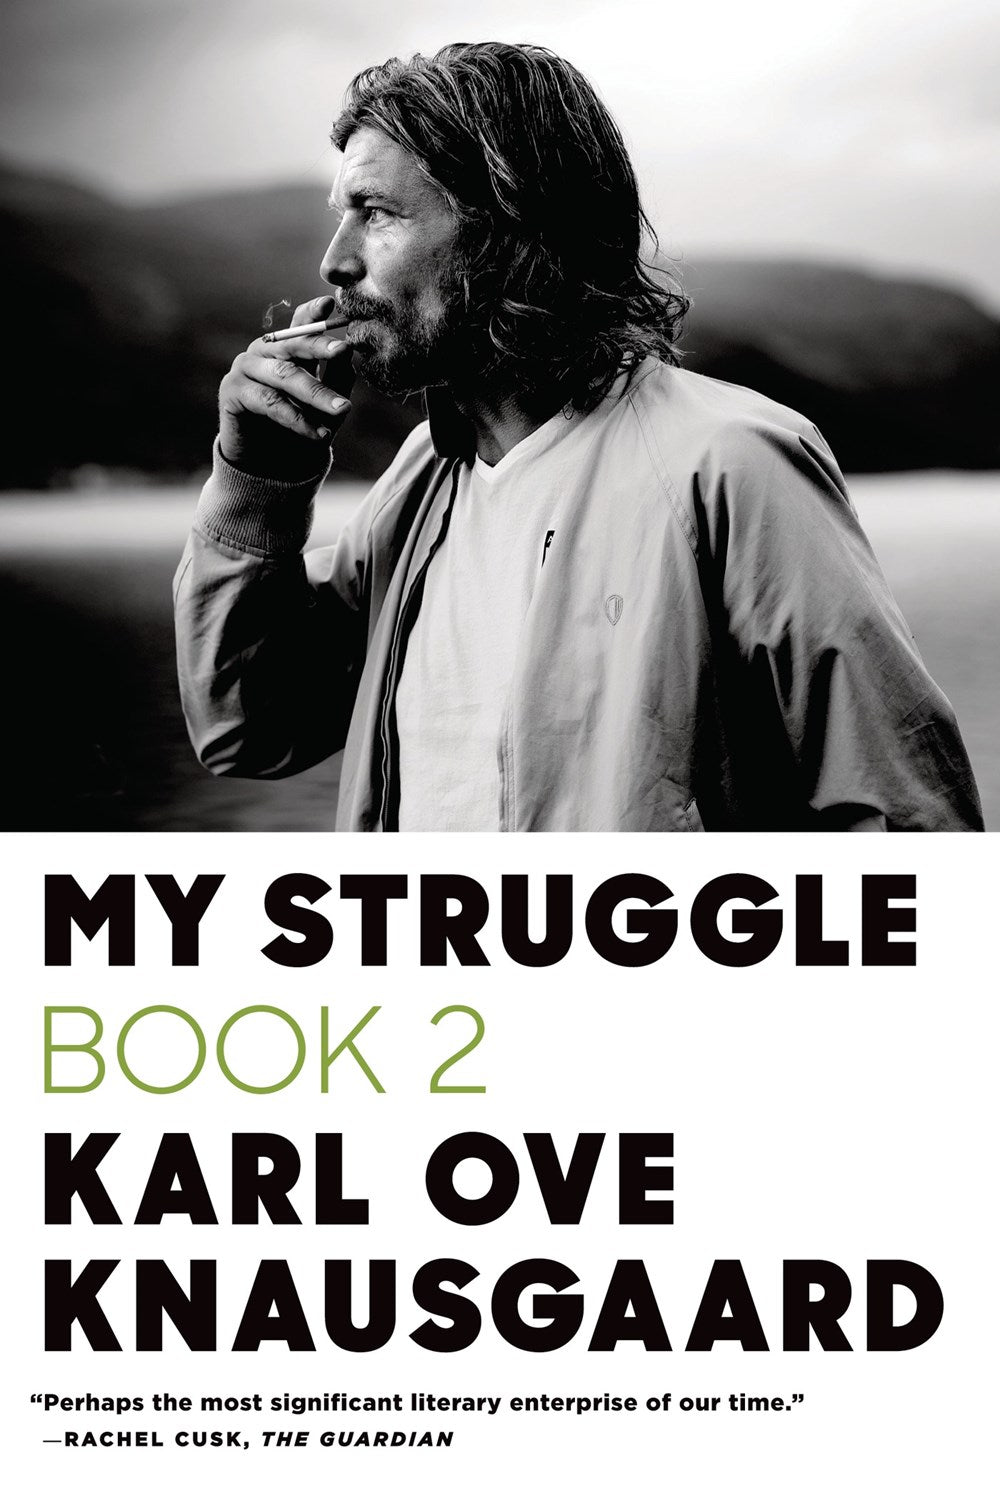 My Struggle: Book 2 (A Man In Love) by Karl Ove Knausgaard (Translated by Don Bartlett)